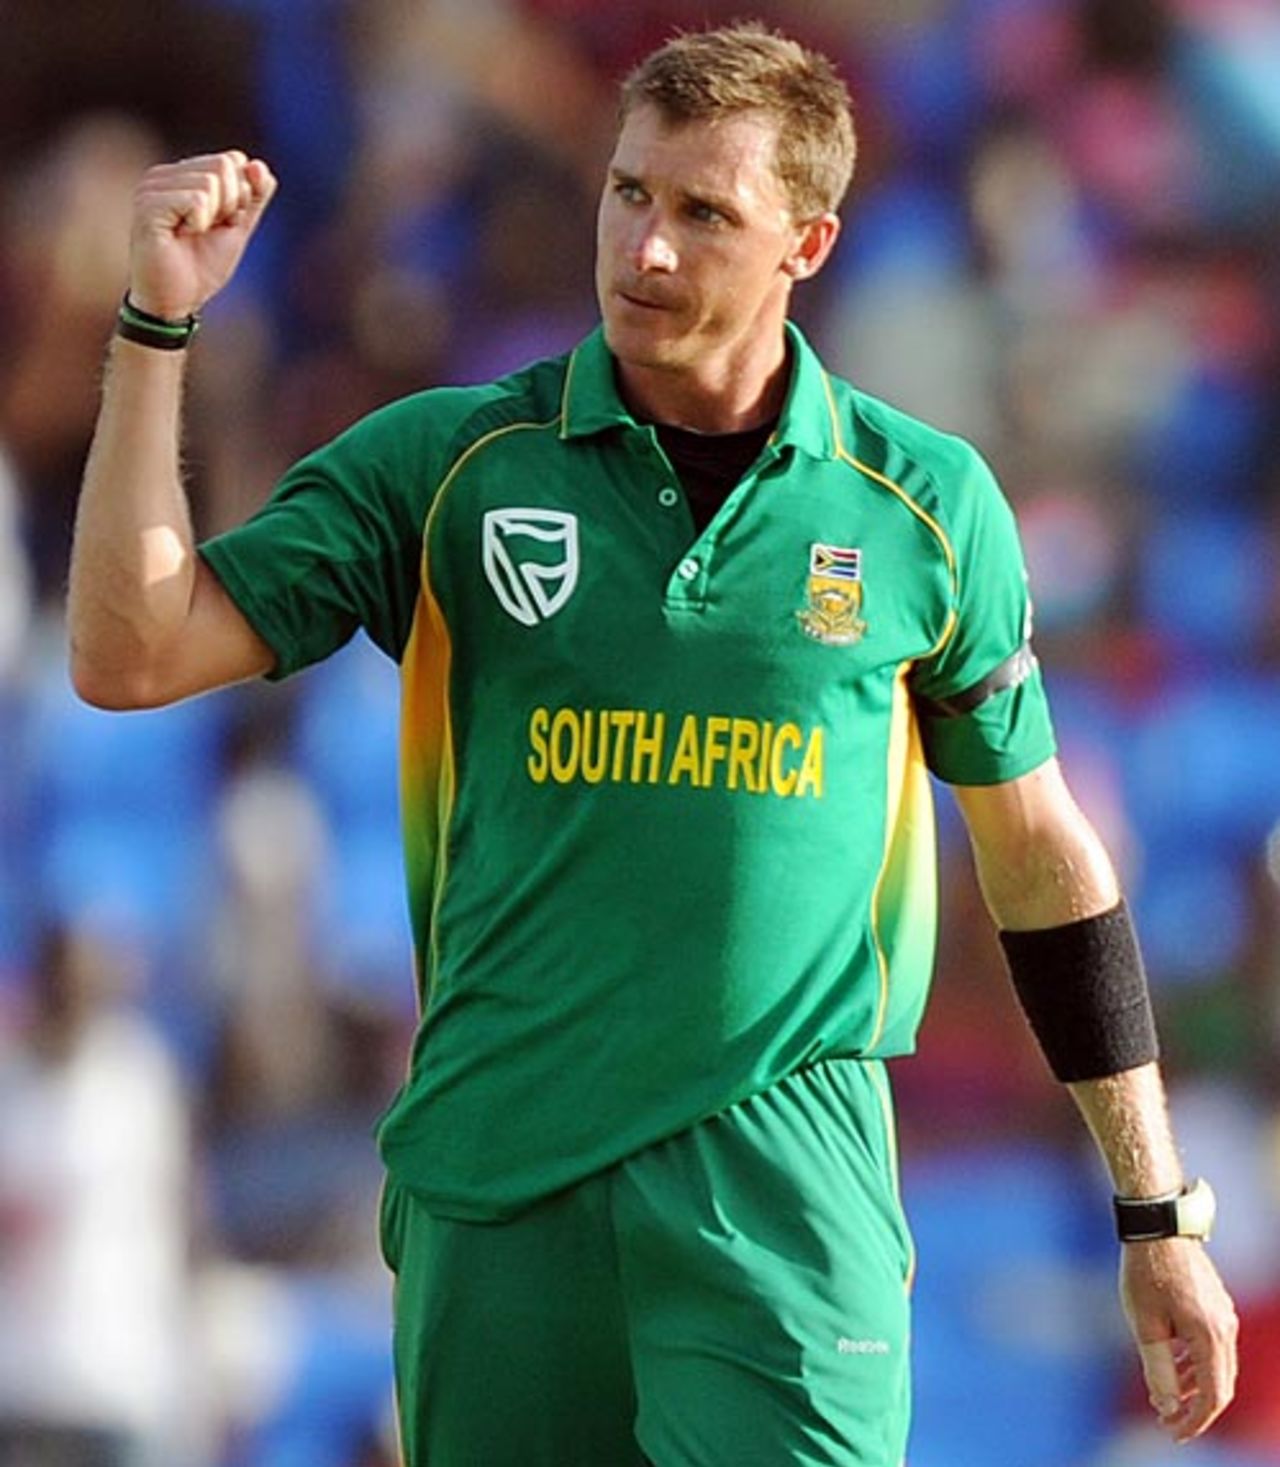 Dale Steyn ended Dwayne Bravo's aggressive innings, West Indies v South Africa, 2nd ODI, Antigua, May 24, 2010